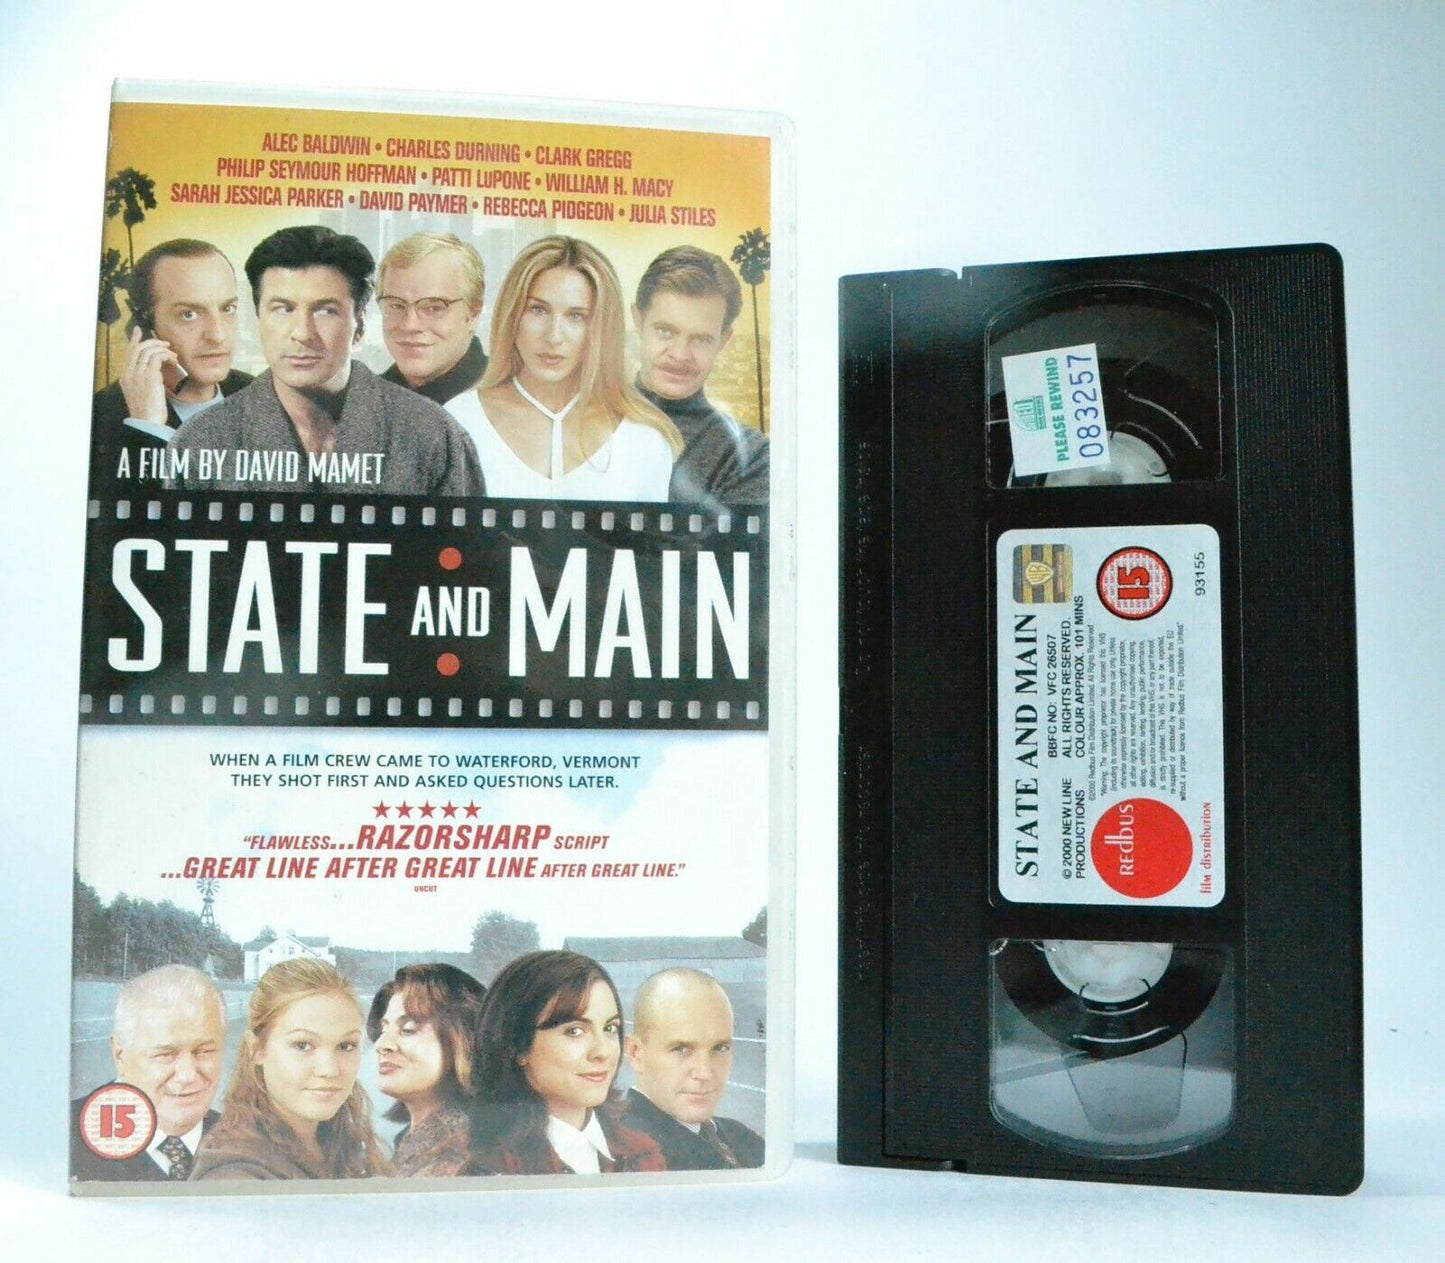 State And Main: P.Seymour Hoffman/W.H.Macy - Comedy (2000) - Large Box - Pal VHS-